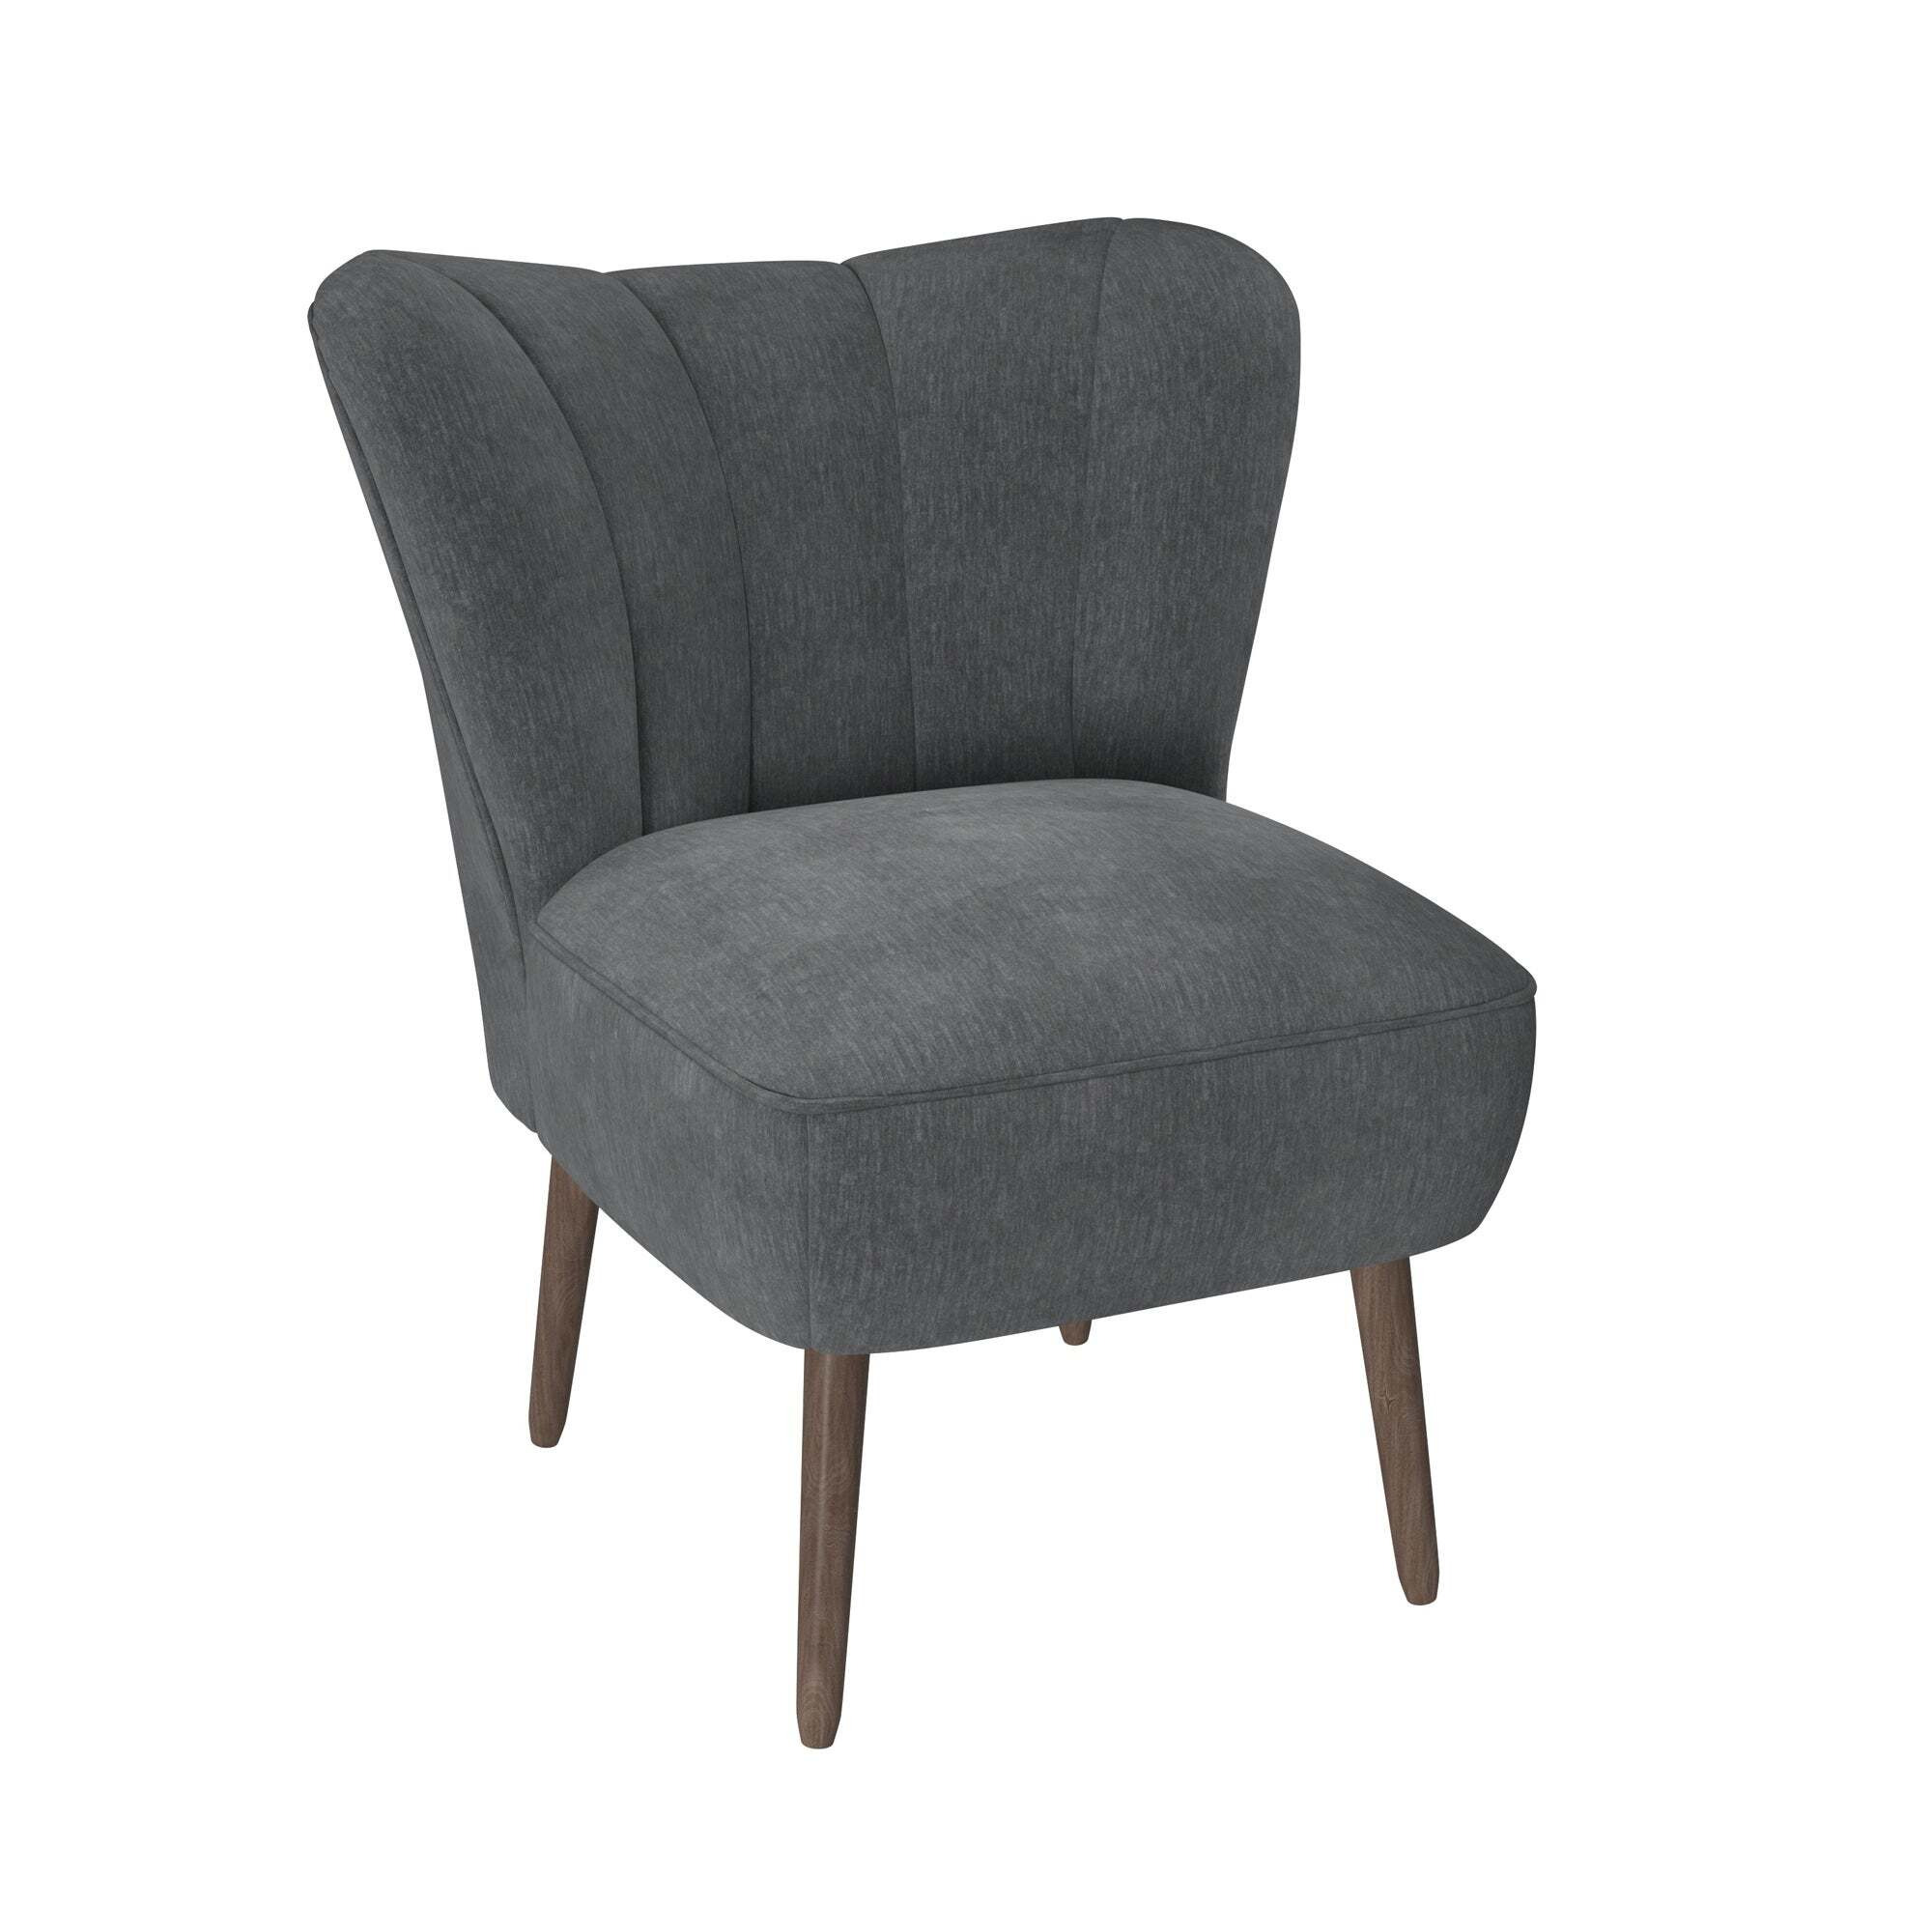 Abby Chenille Occasional Chair Charcoal